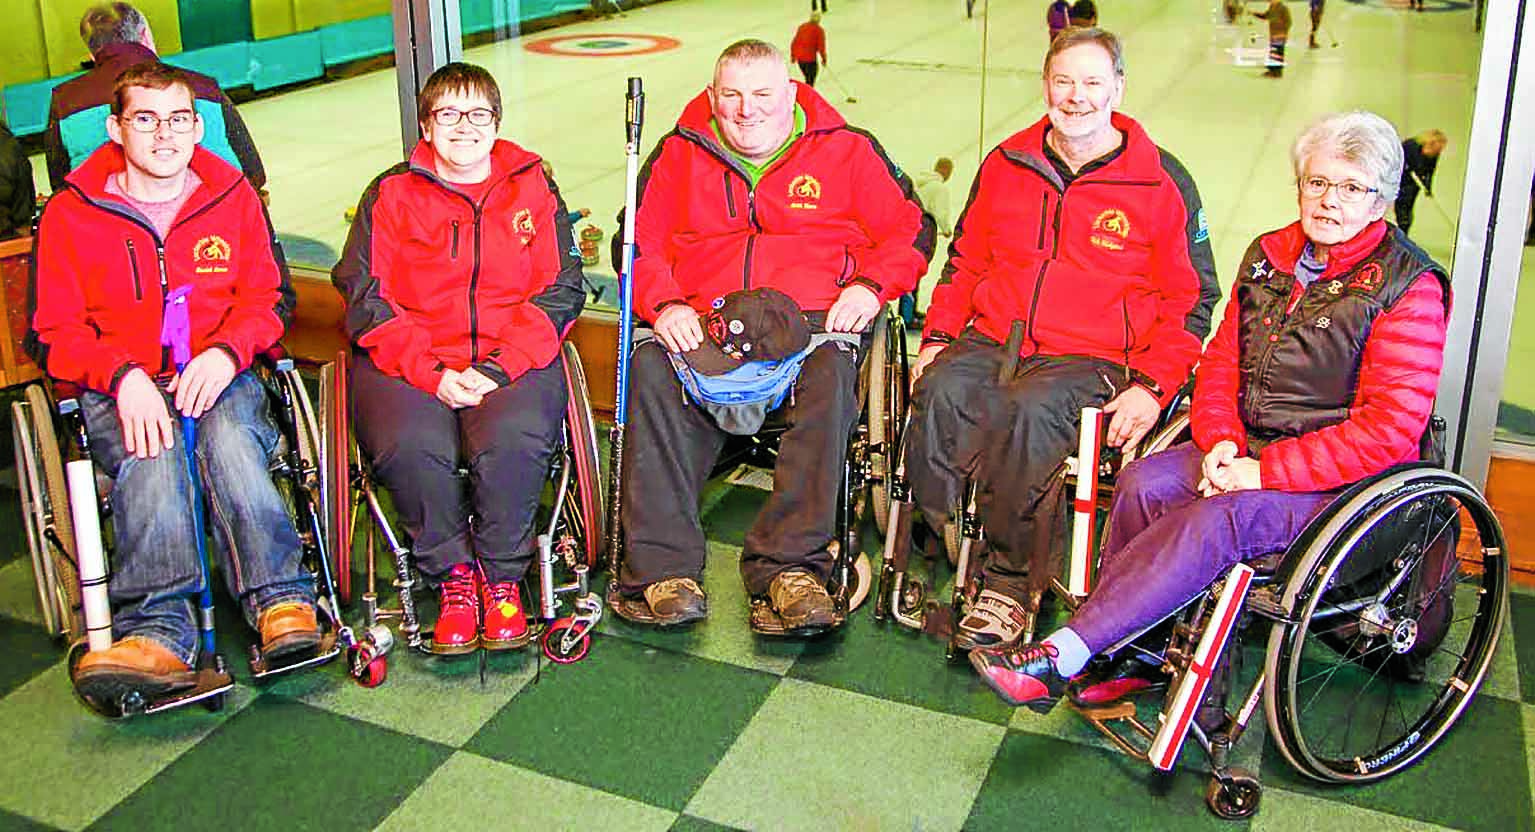 £900 boost for club curlers